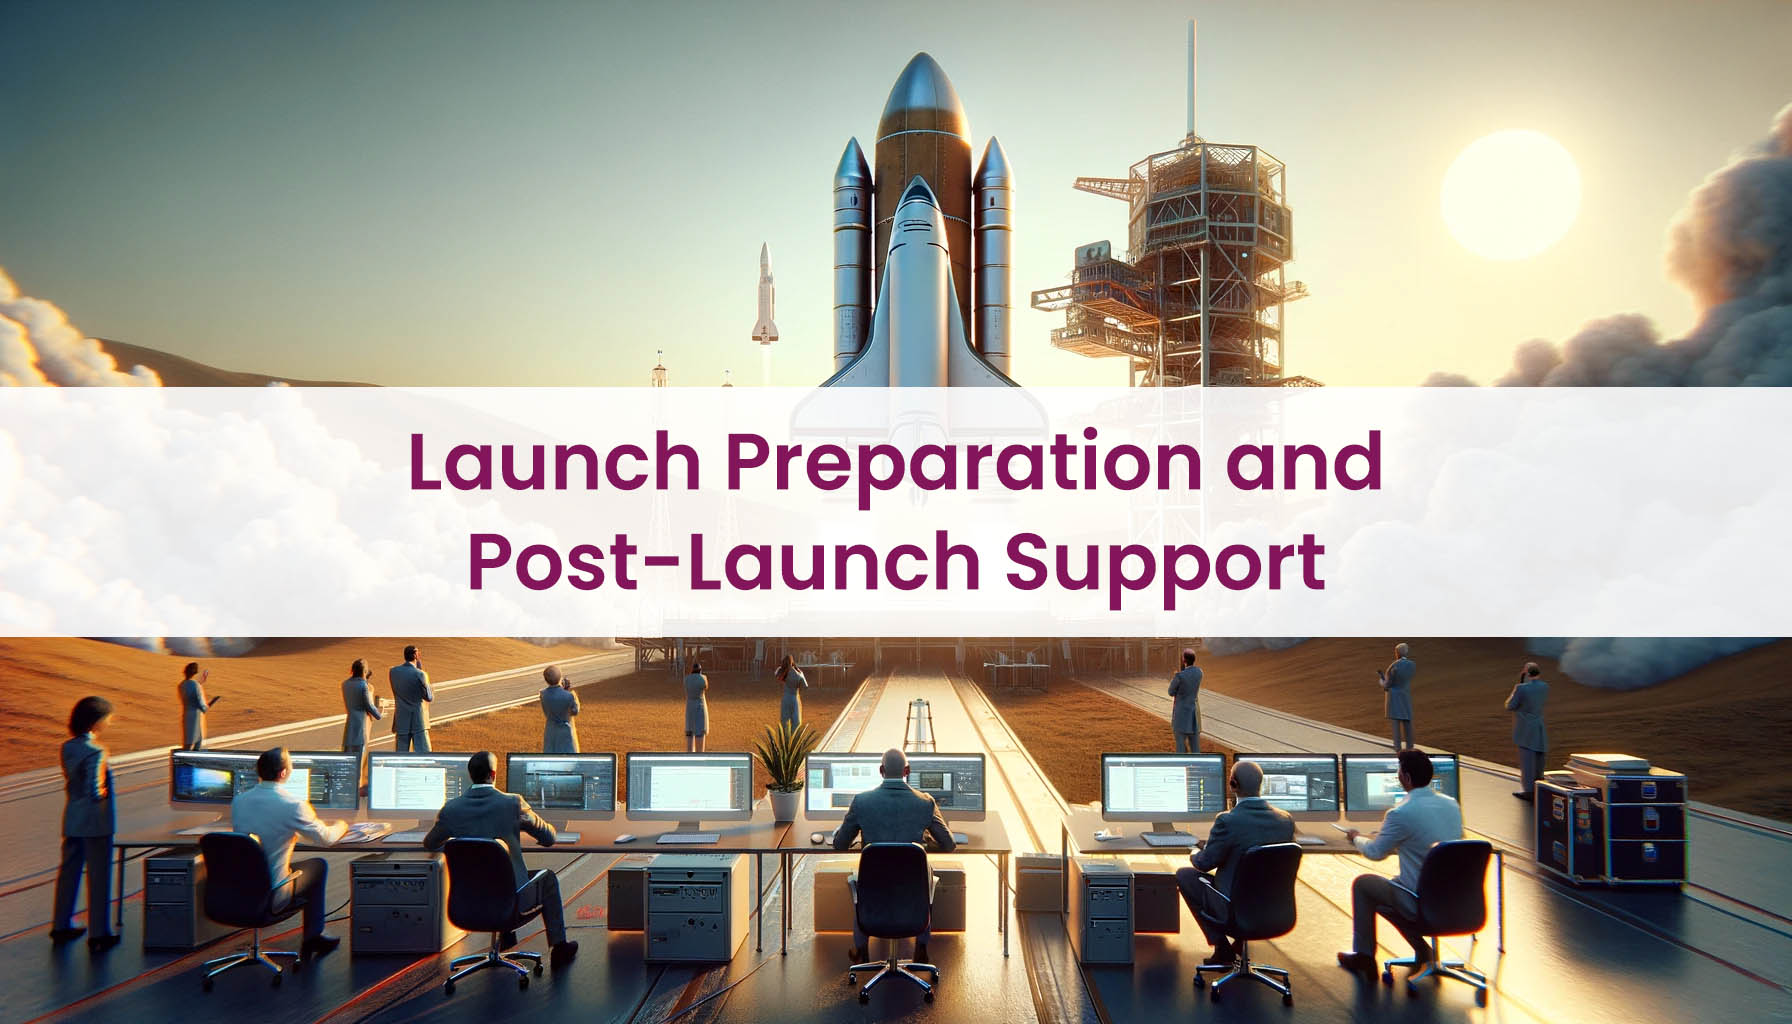 Launch Preparation and Post-Launch Support